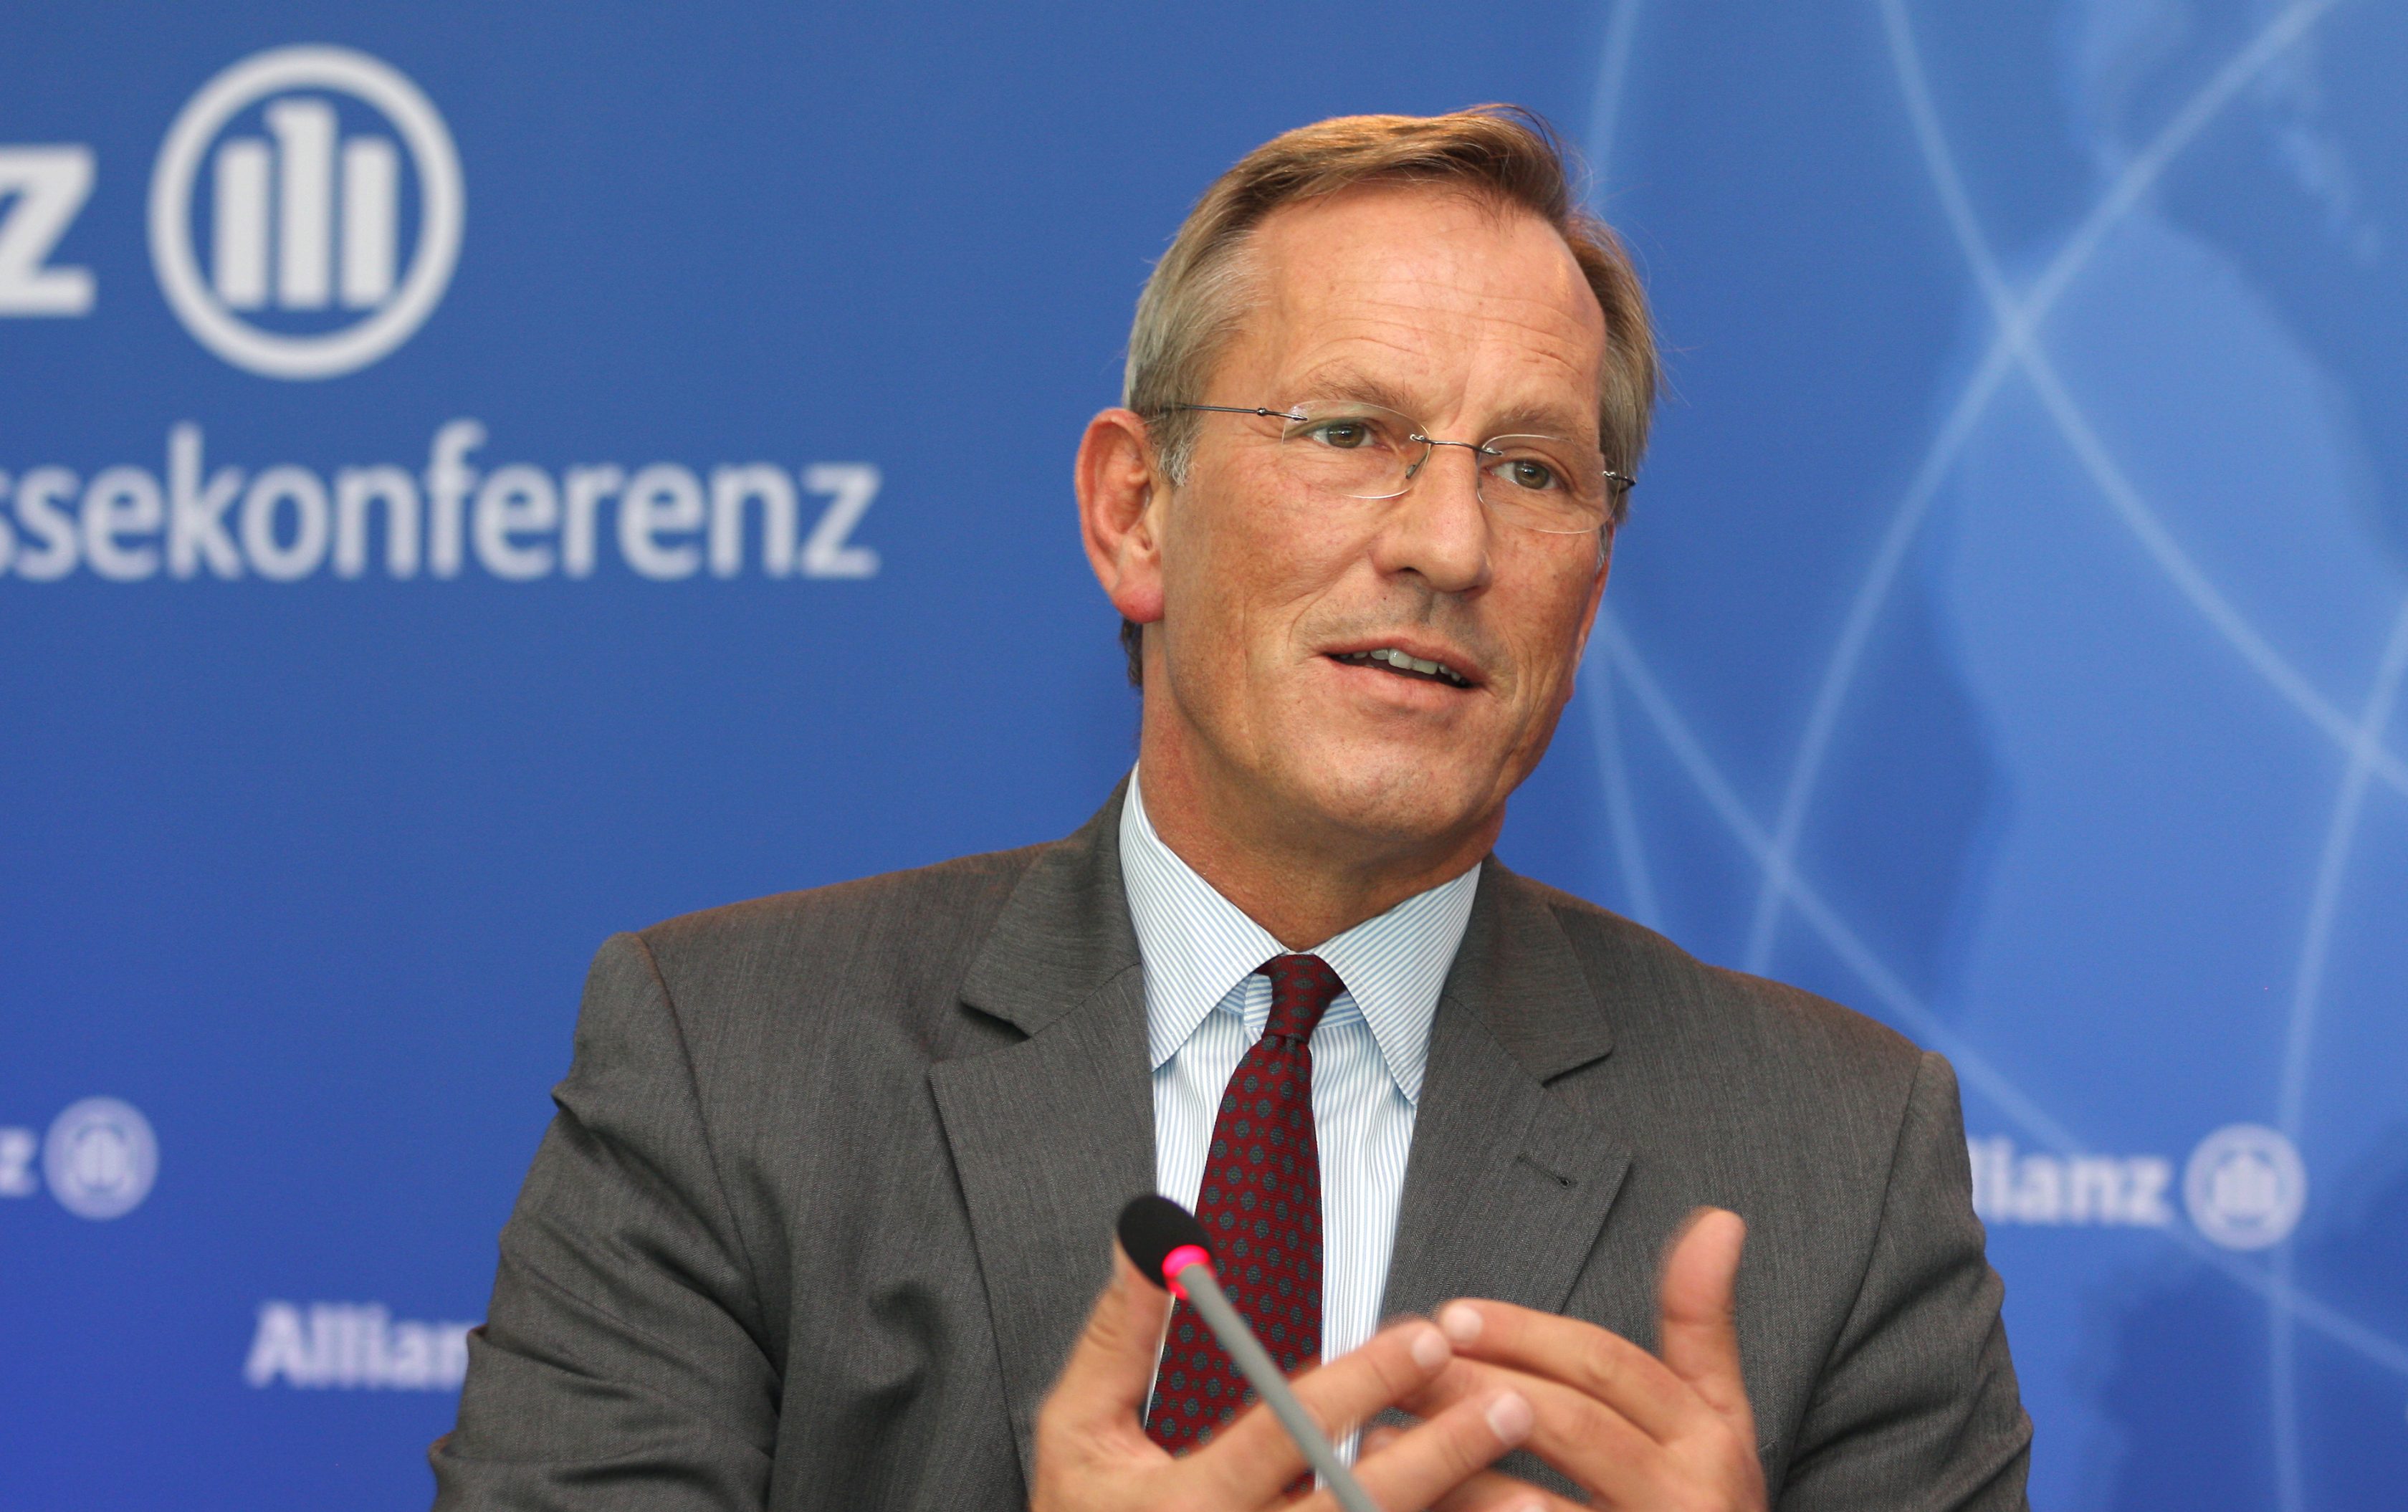 CEO Michael Diekmann at the press conference 2009